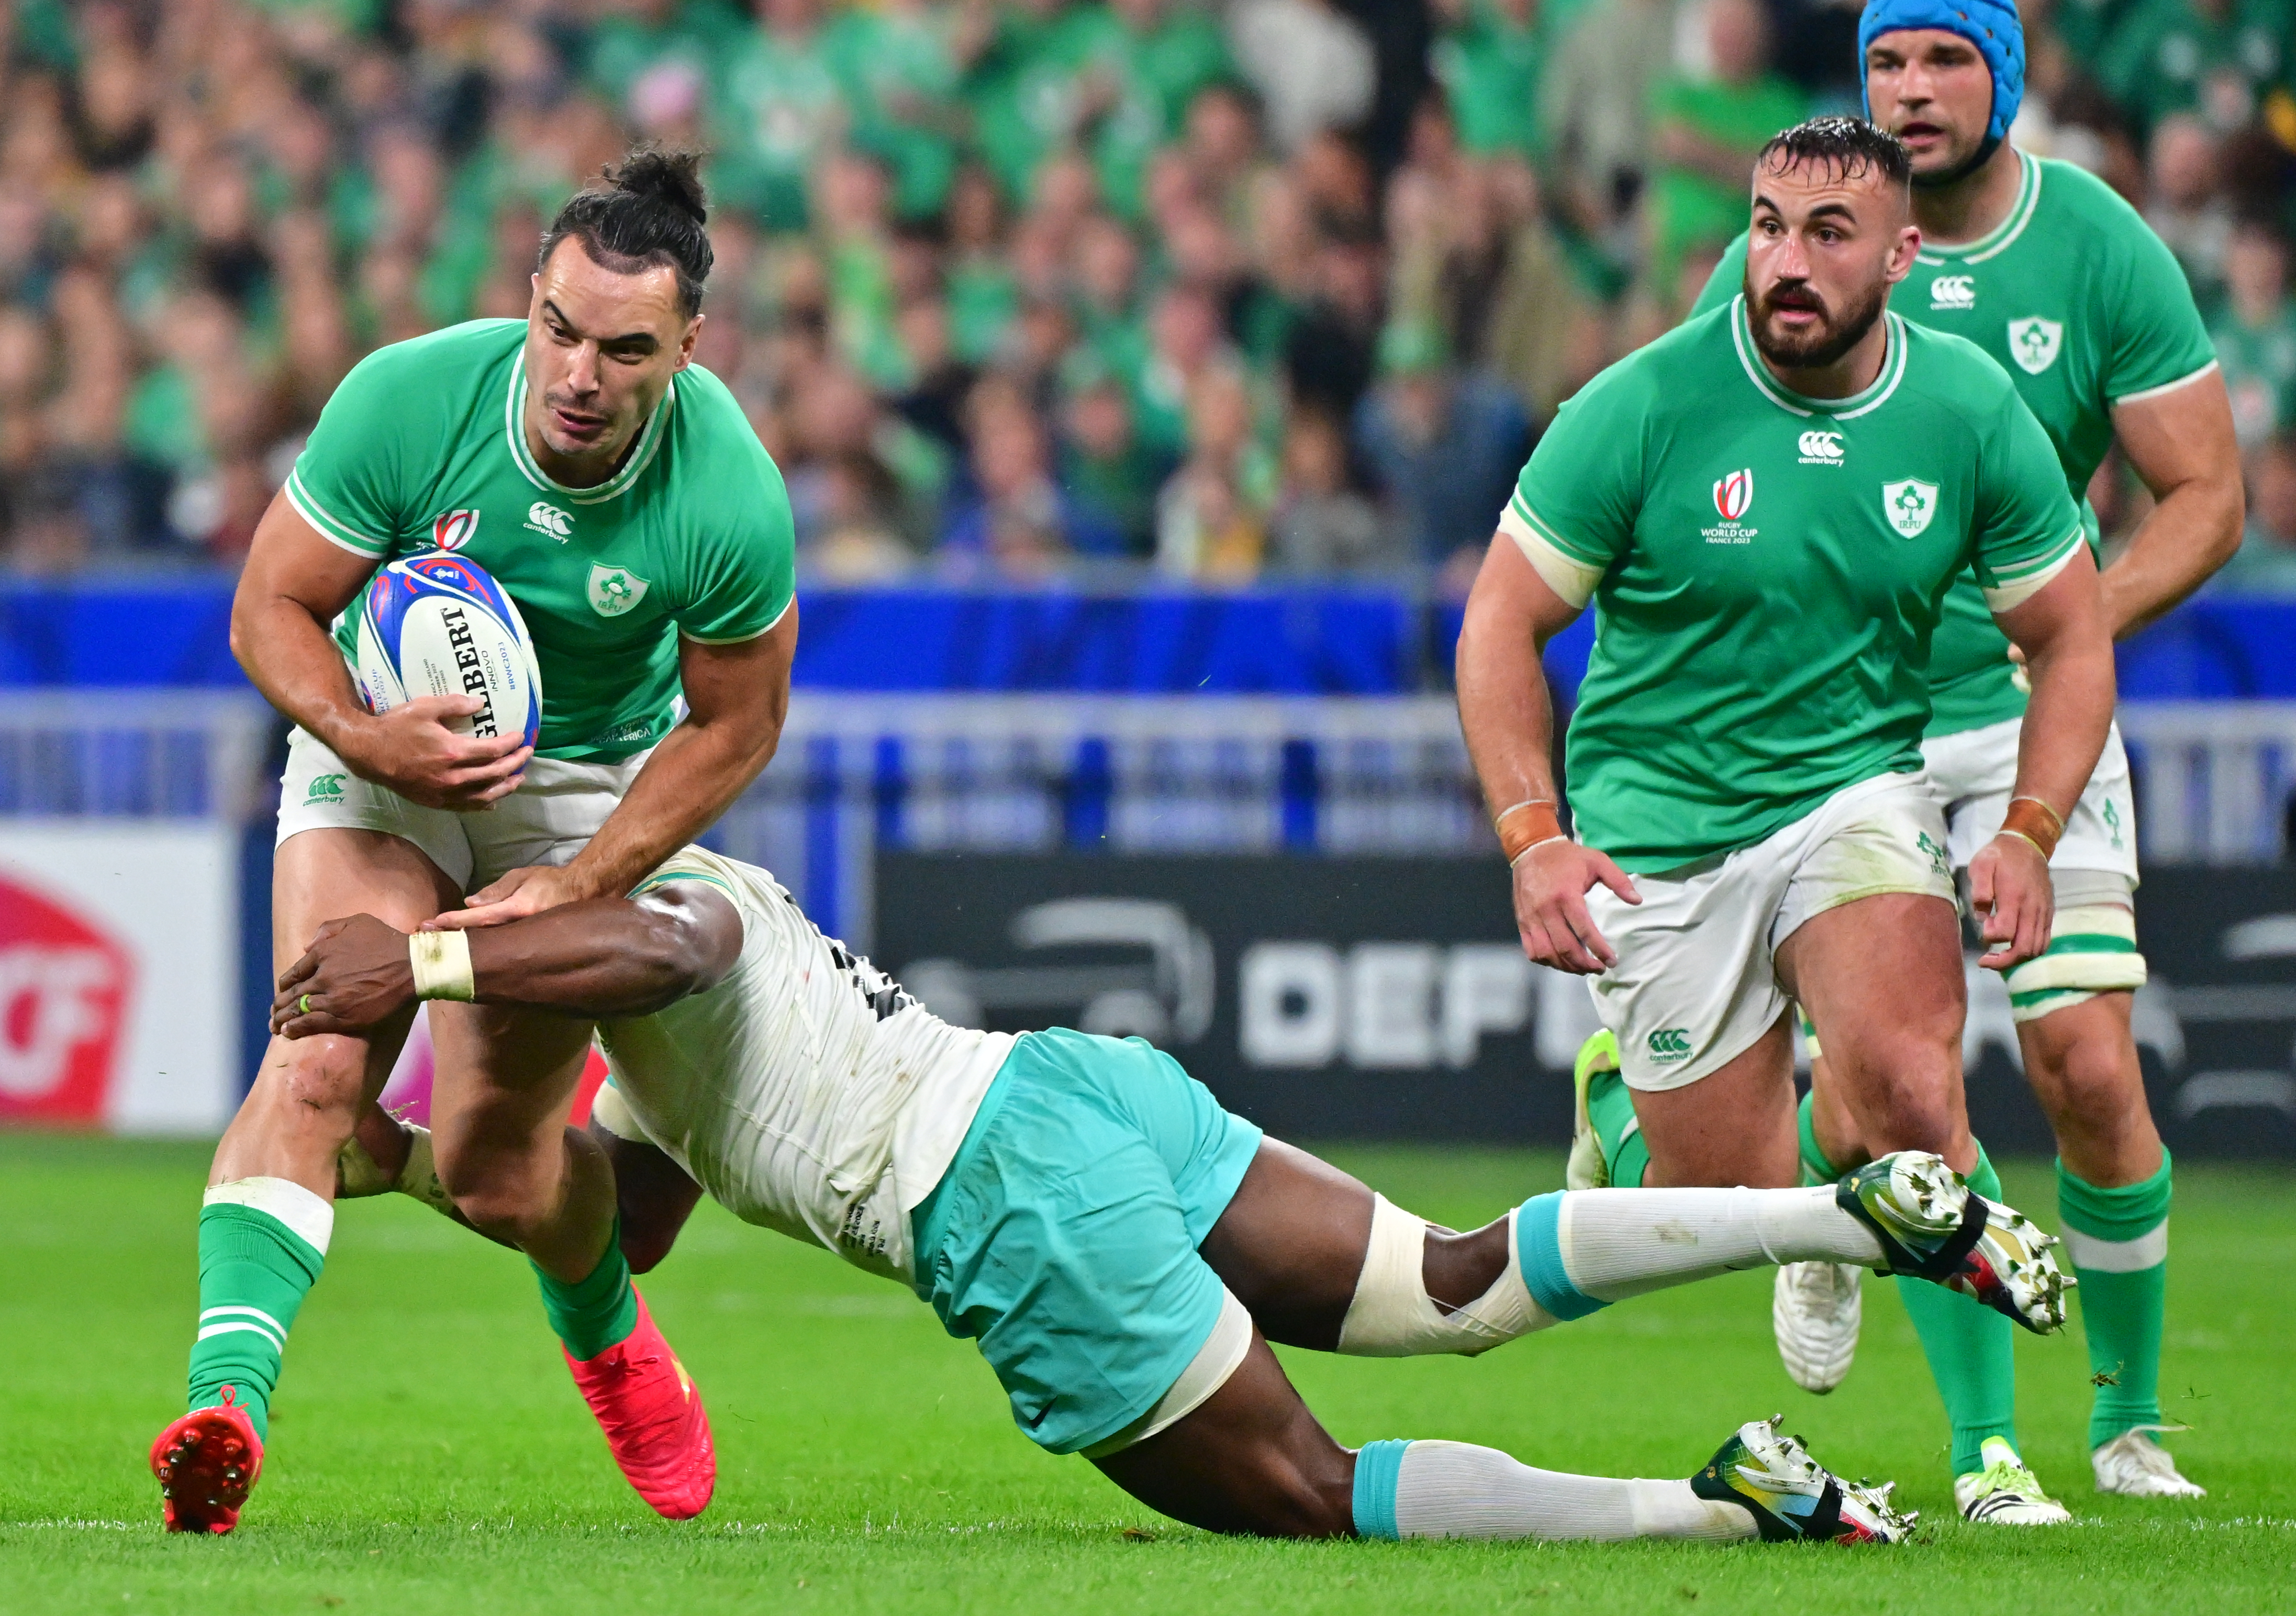 Rugby World Cup Ireland have the priceless qualities the All Blacks once had - Gregor Paul